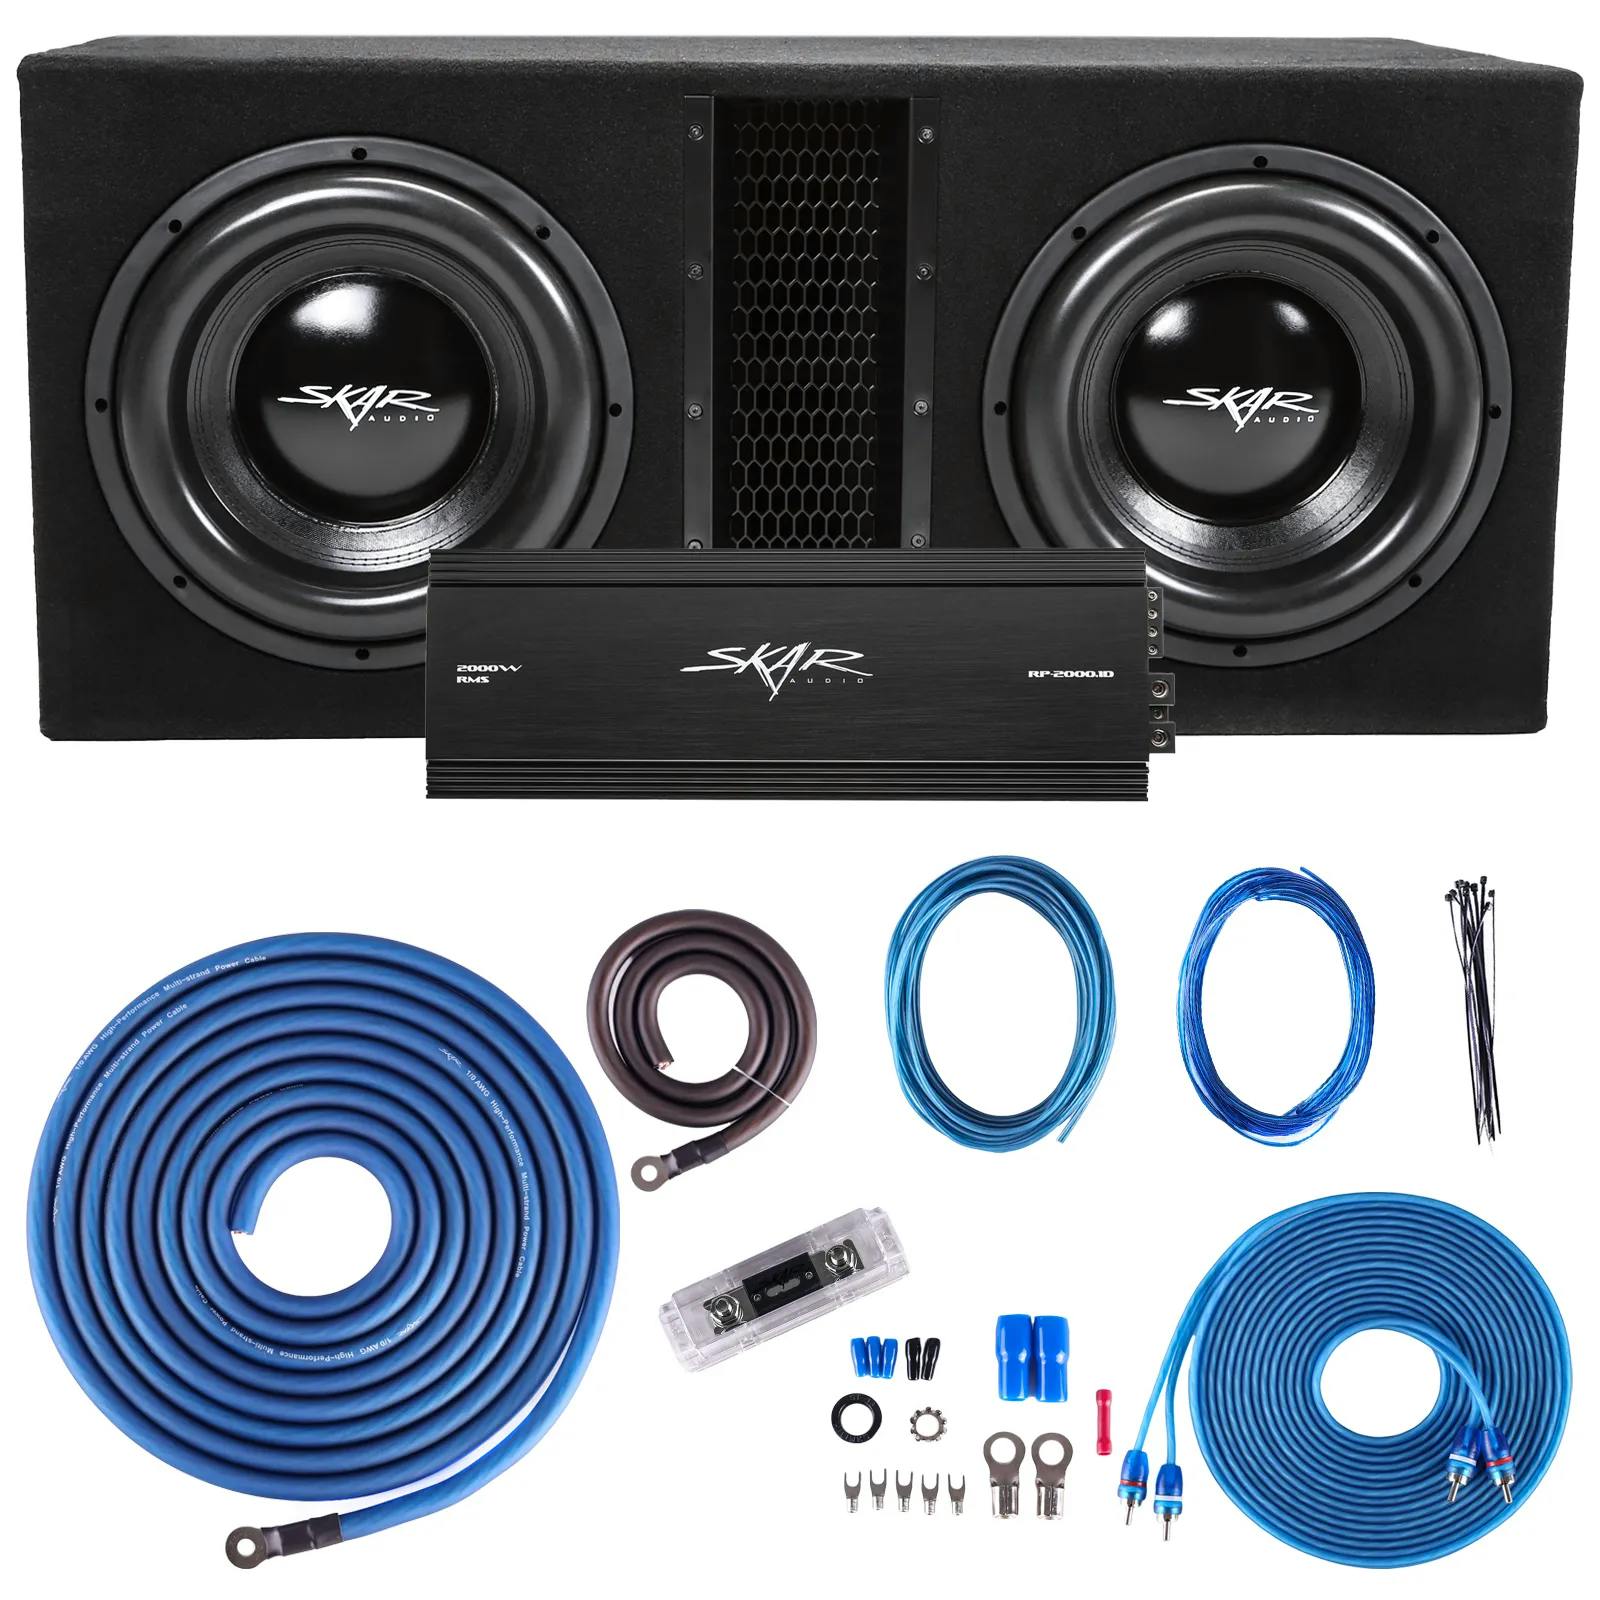 Featured Product Photo for Dual 12" 5,000 Watt EVL Series Complete Subwoofer Package with Vented Enclosure and Amplifier